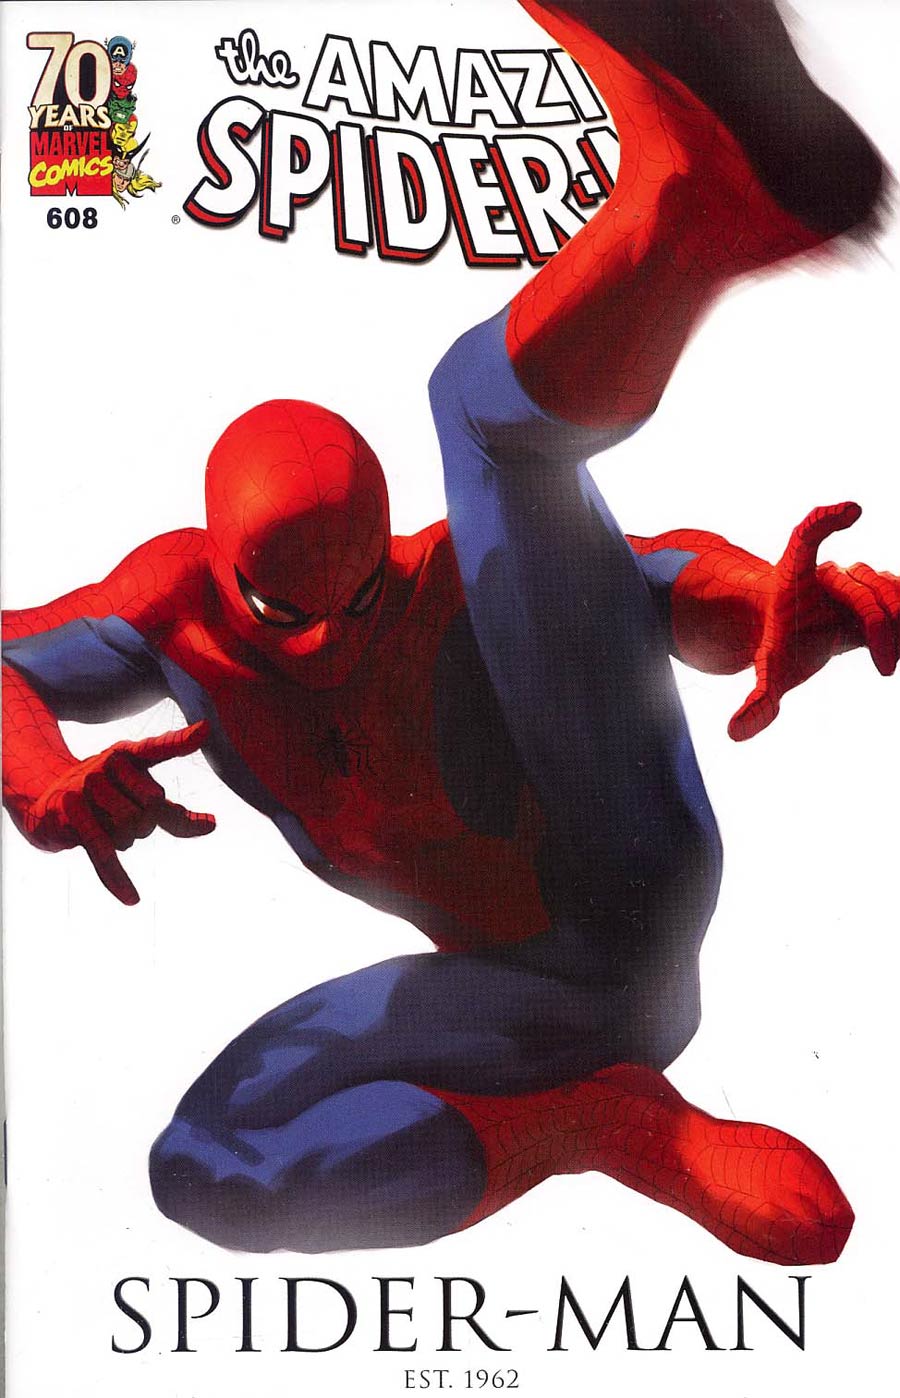 Amazing Spider-Man Vol 2 #608 Cover B 70th Anniversary Djurdjevic Variant Cover